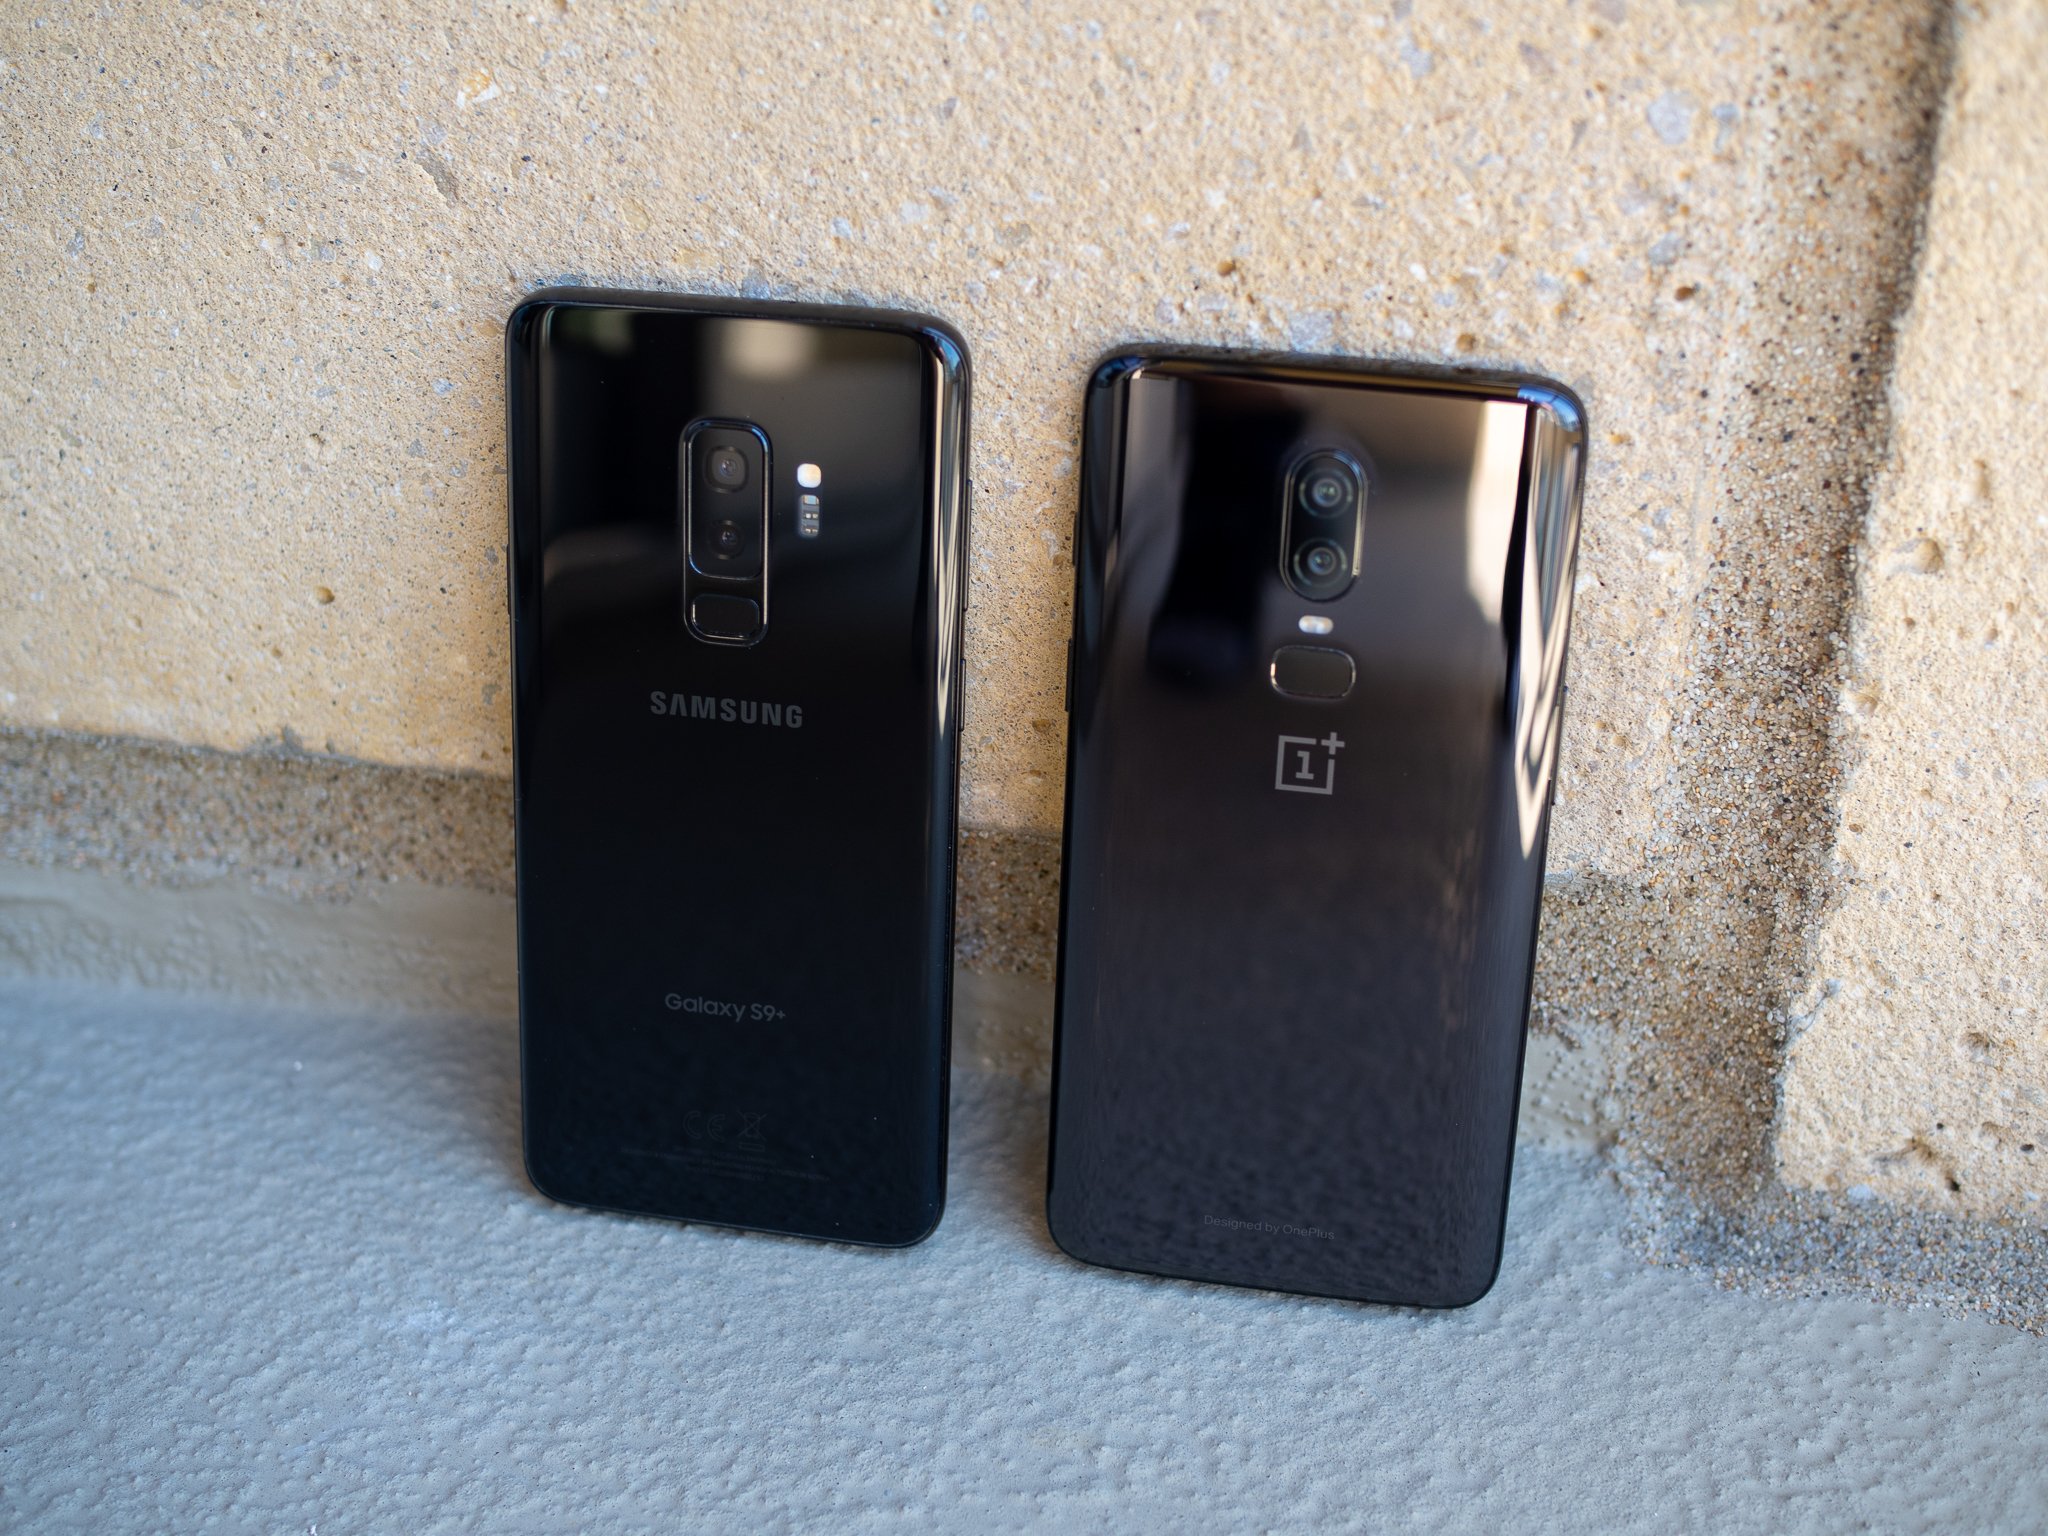 Draaien baai onderhoud OnePlus 6 vs. Samsung Galaxy S9+: Which should you buy? | Android Central